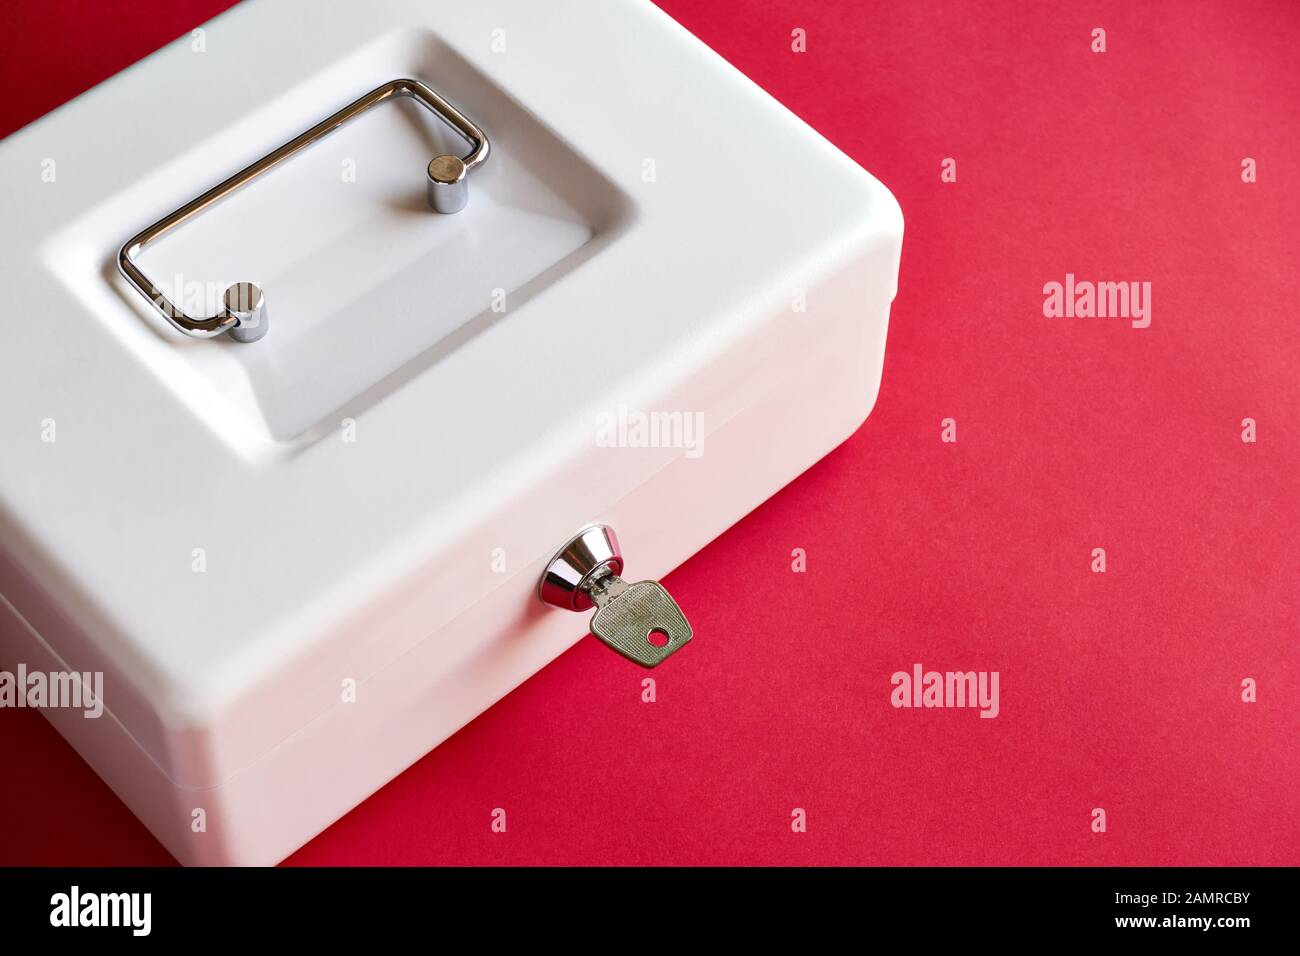 Close up of small white closed cashbox or money box with key in lock on dark pink background with copy space. Stock Photo